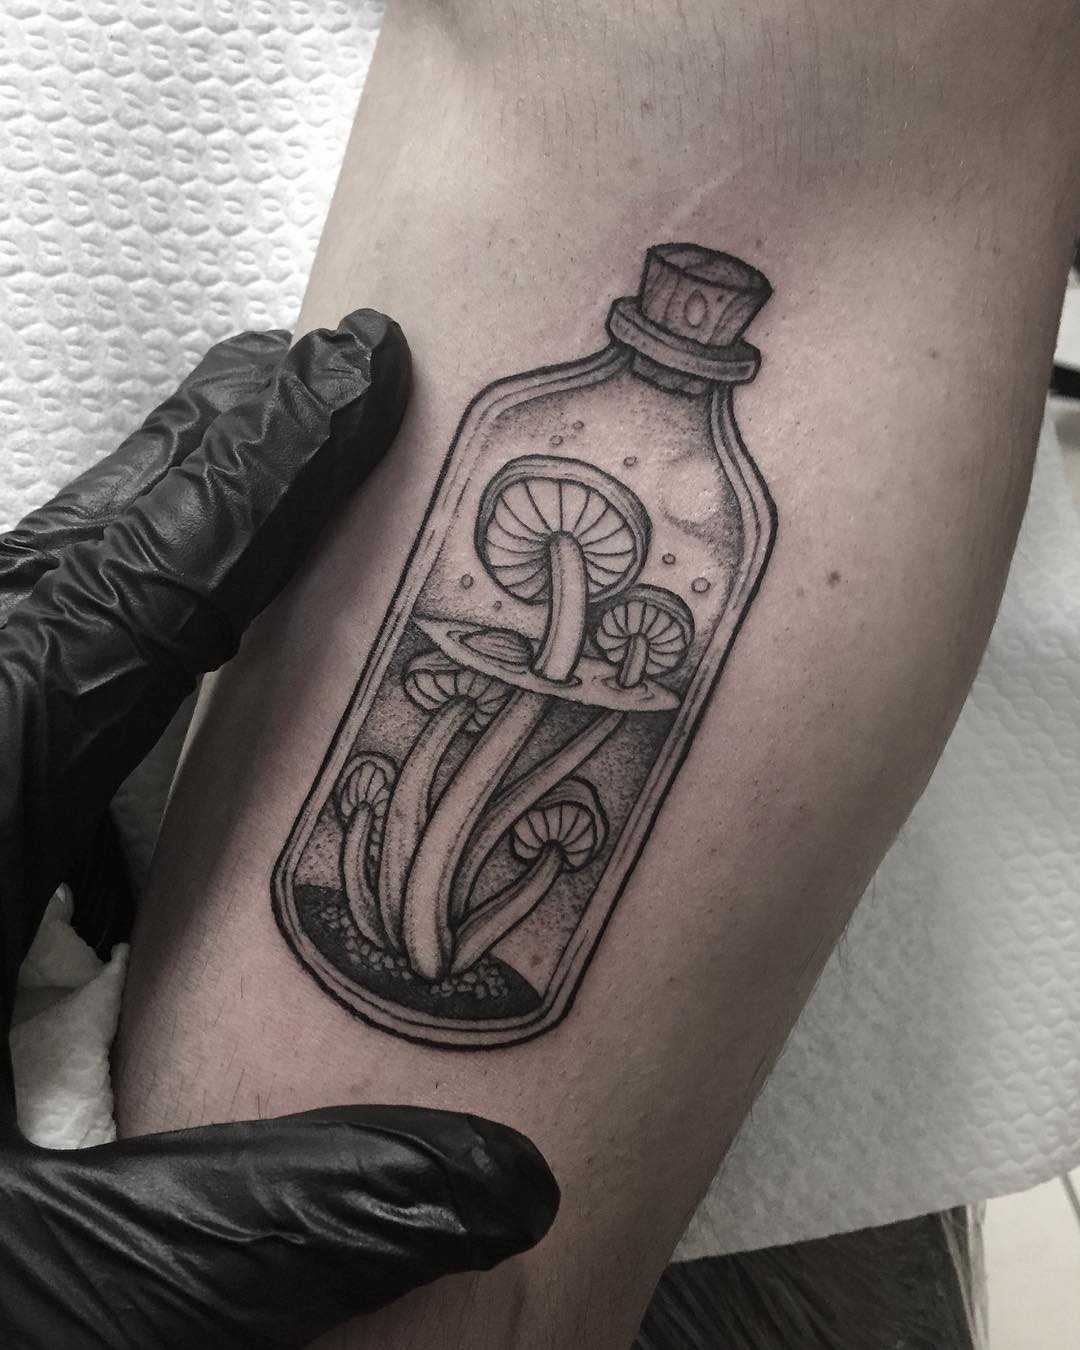 Mushrooms in a bottle done at Primordial Pain Tattoo